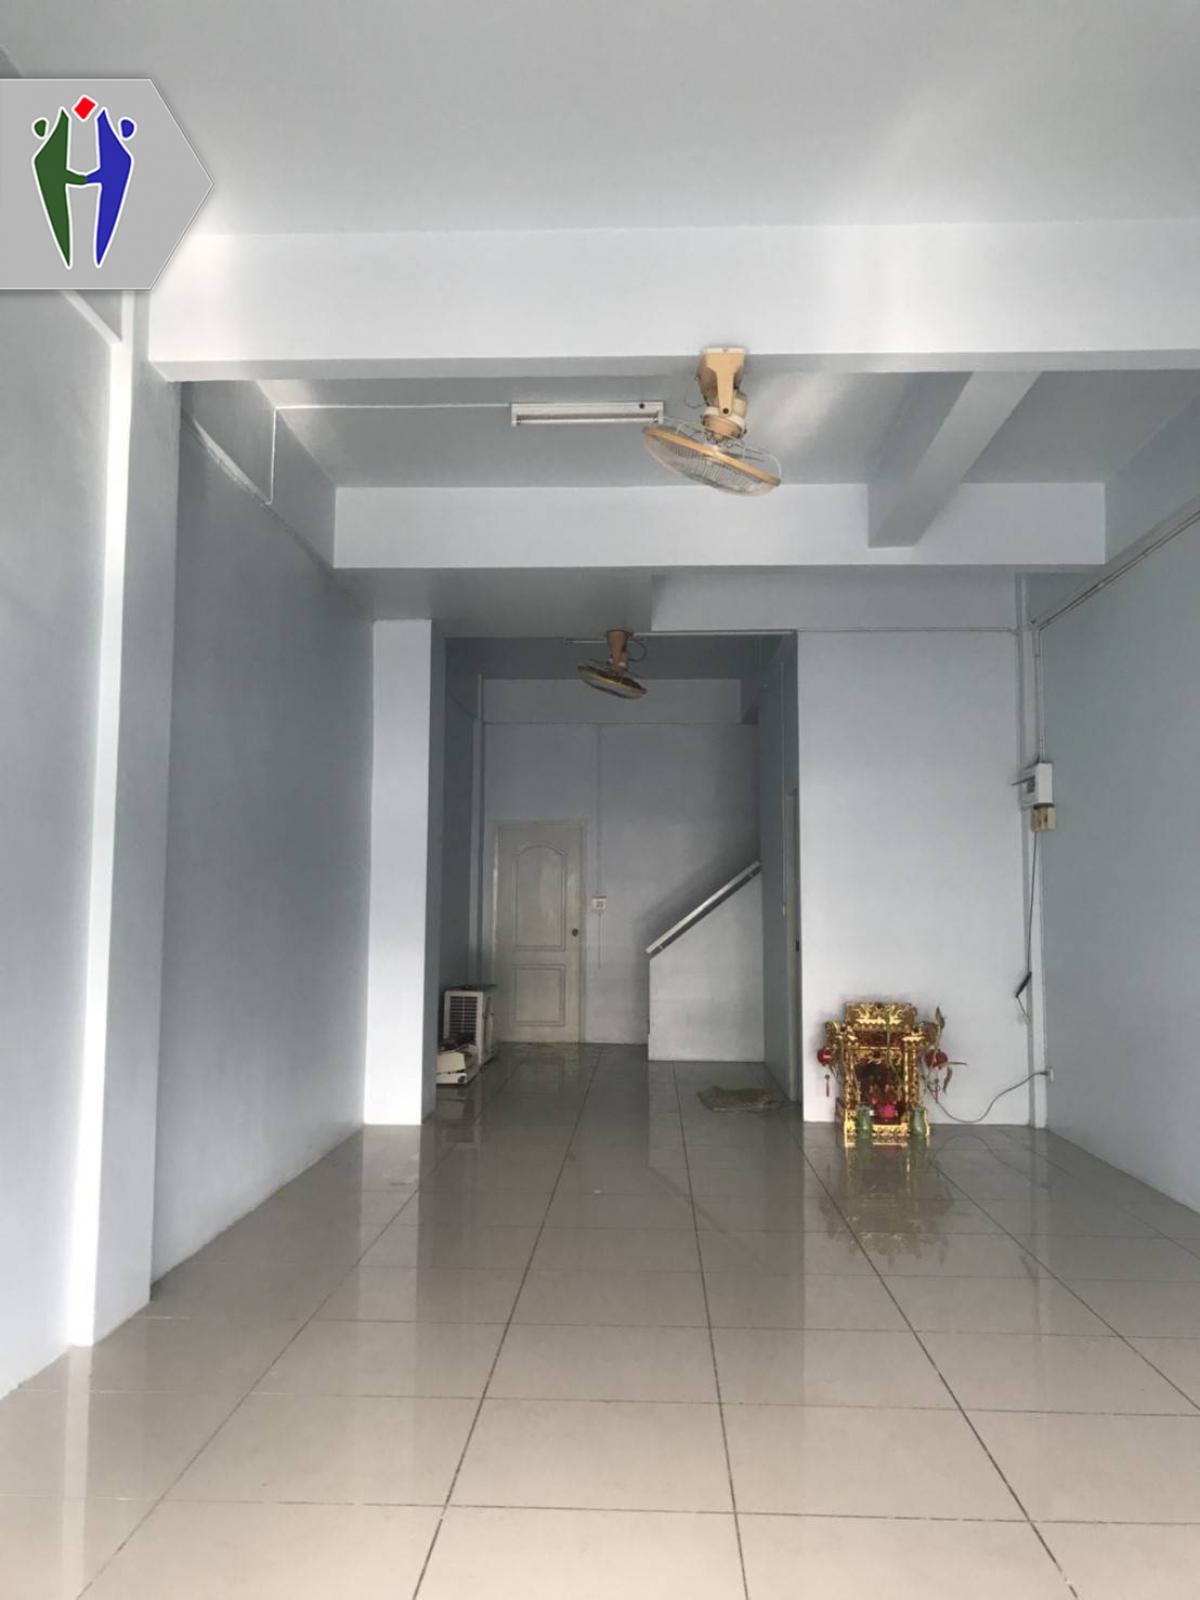 Picture of Commercial Building For Rent in Cholburi, Chon Buri, Thailand